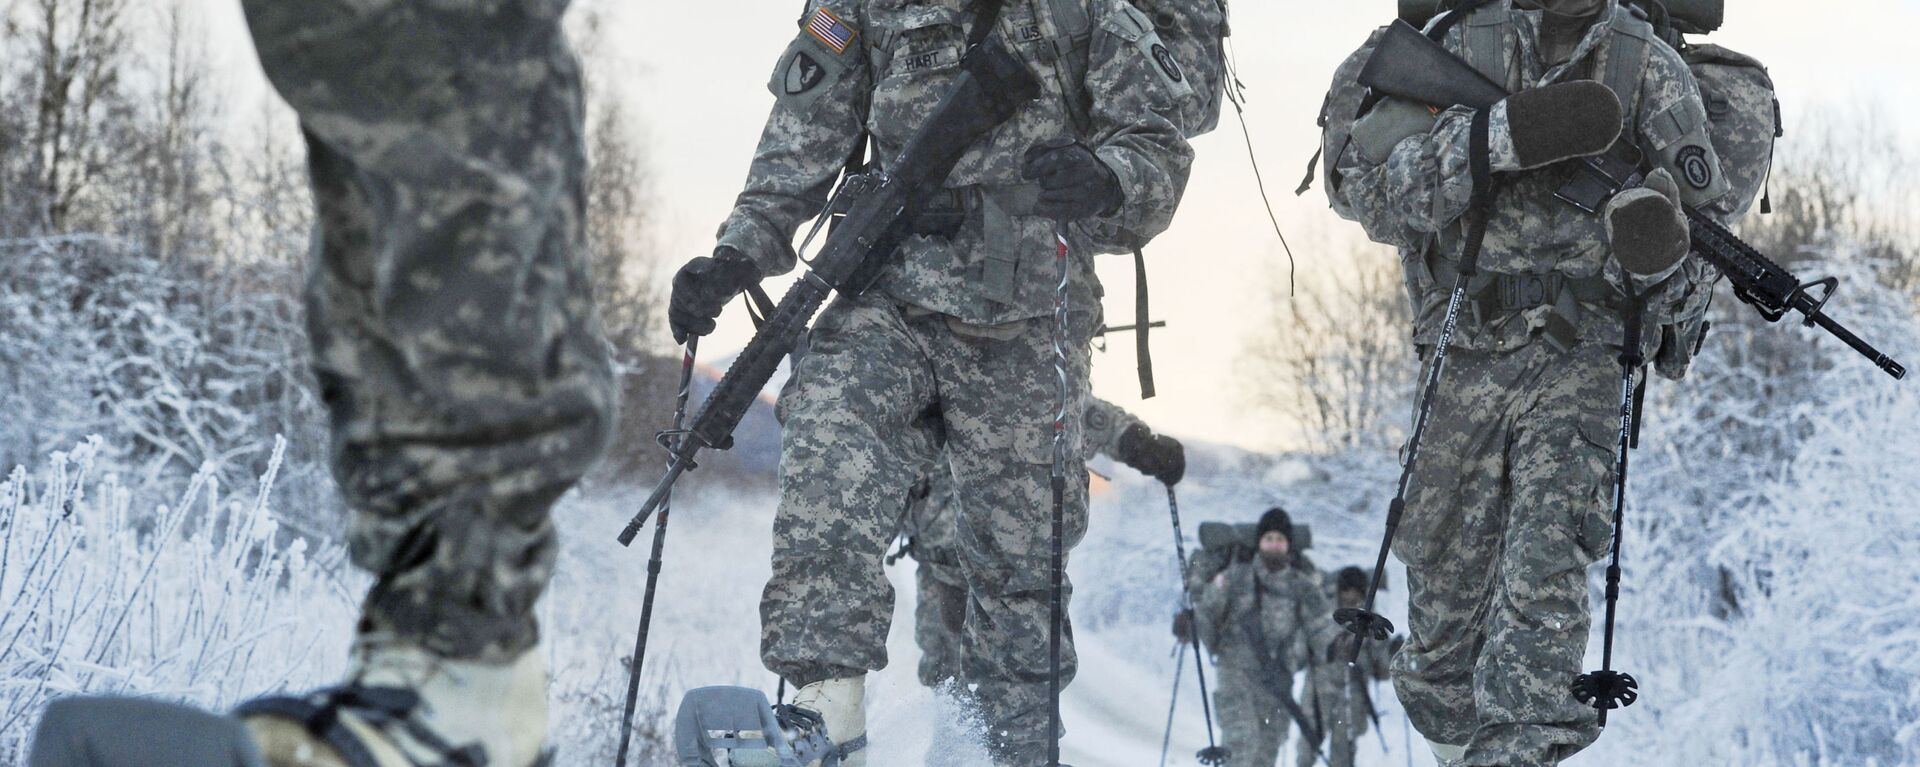 In this 6 December 2012 photo provided by the US Department of Defense, soldiers assigned to 6th Engineer Battalion utilise snow shoes during Arctic Light Individual Training on the Bulldog Trail in sub-zero conditions at Joint Base Elmendorf-Richardson, Alaska.  ALIT is the United States Army Alaska's Cold Weather Indoctrination program. It gives all soldiers, regardless of their job, the foundation to successfully work, train, and go to war in some of the harshest environments in the world.  - Sputnik International, 1920, 27.07.2021